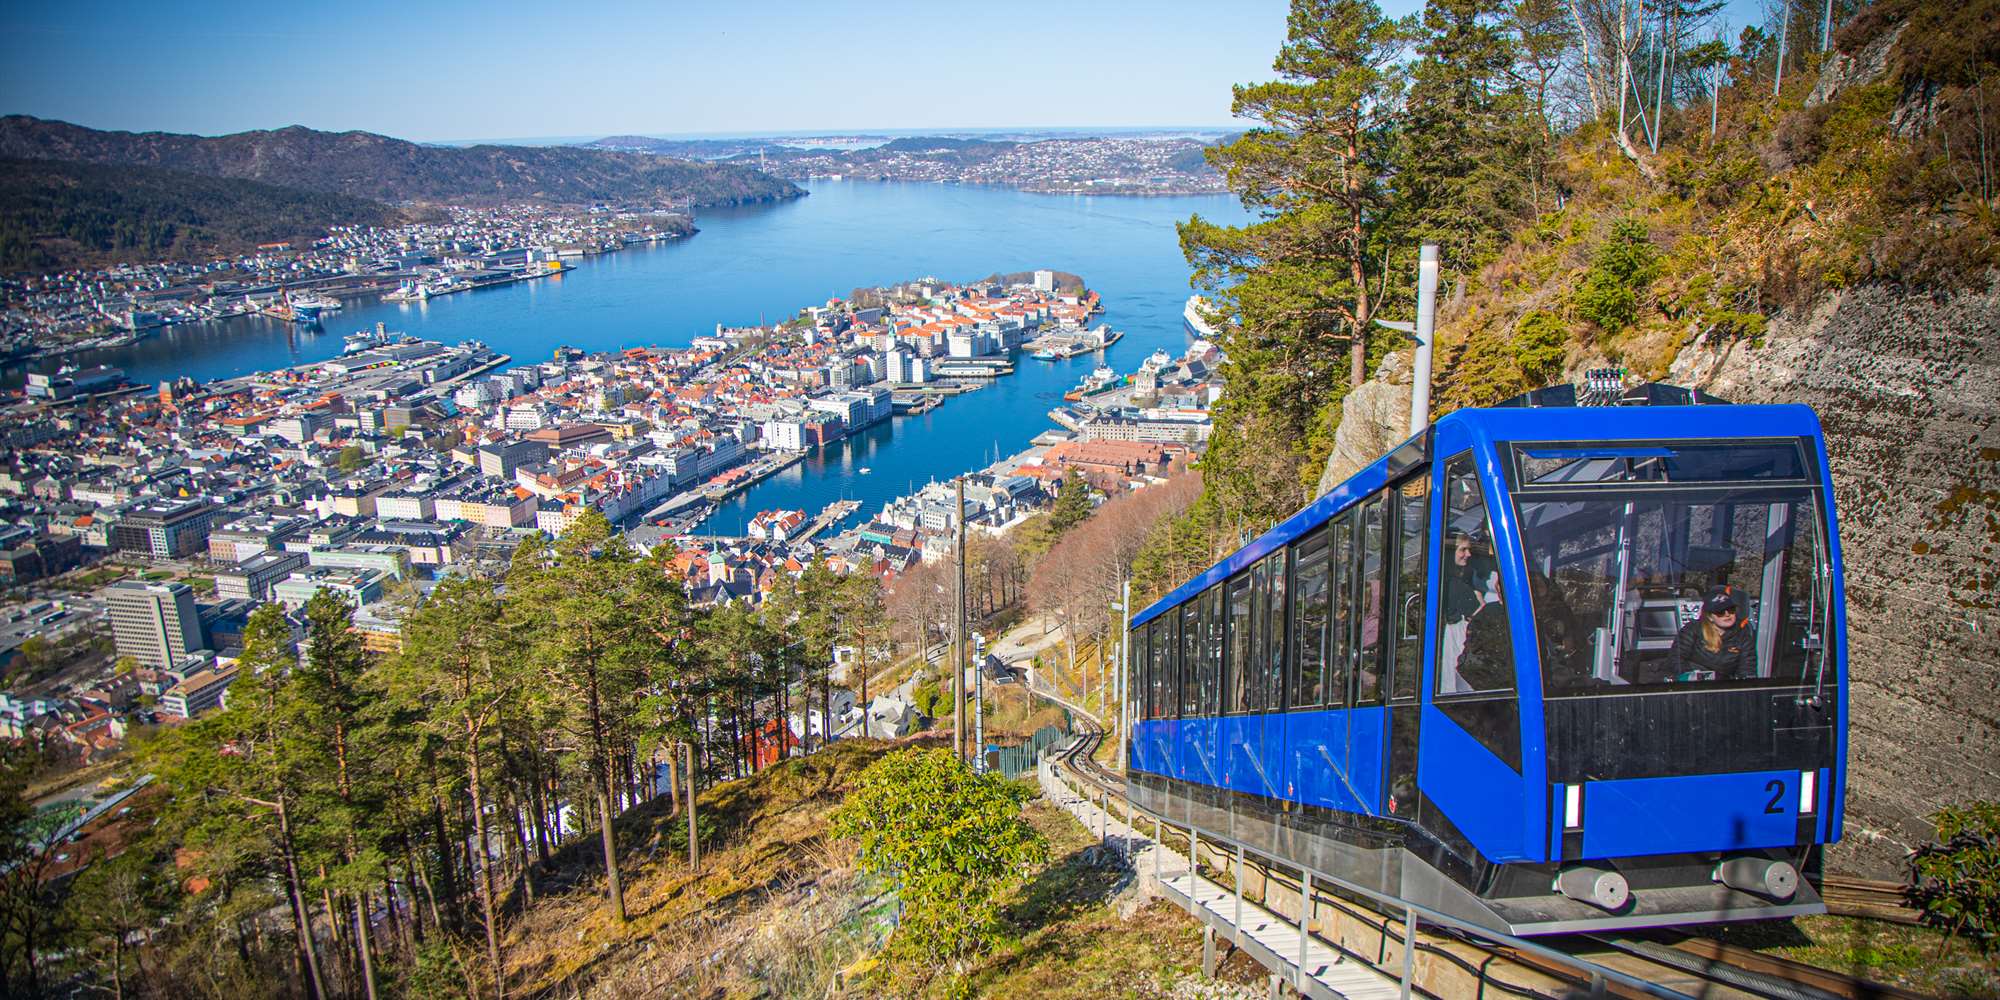 Fløibanen funicular - new carriages in 2002